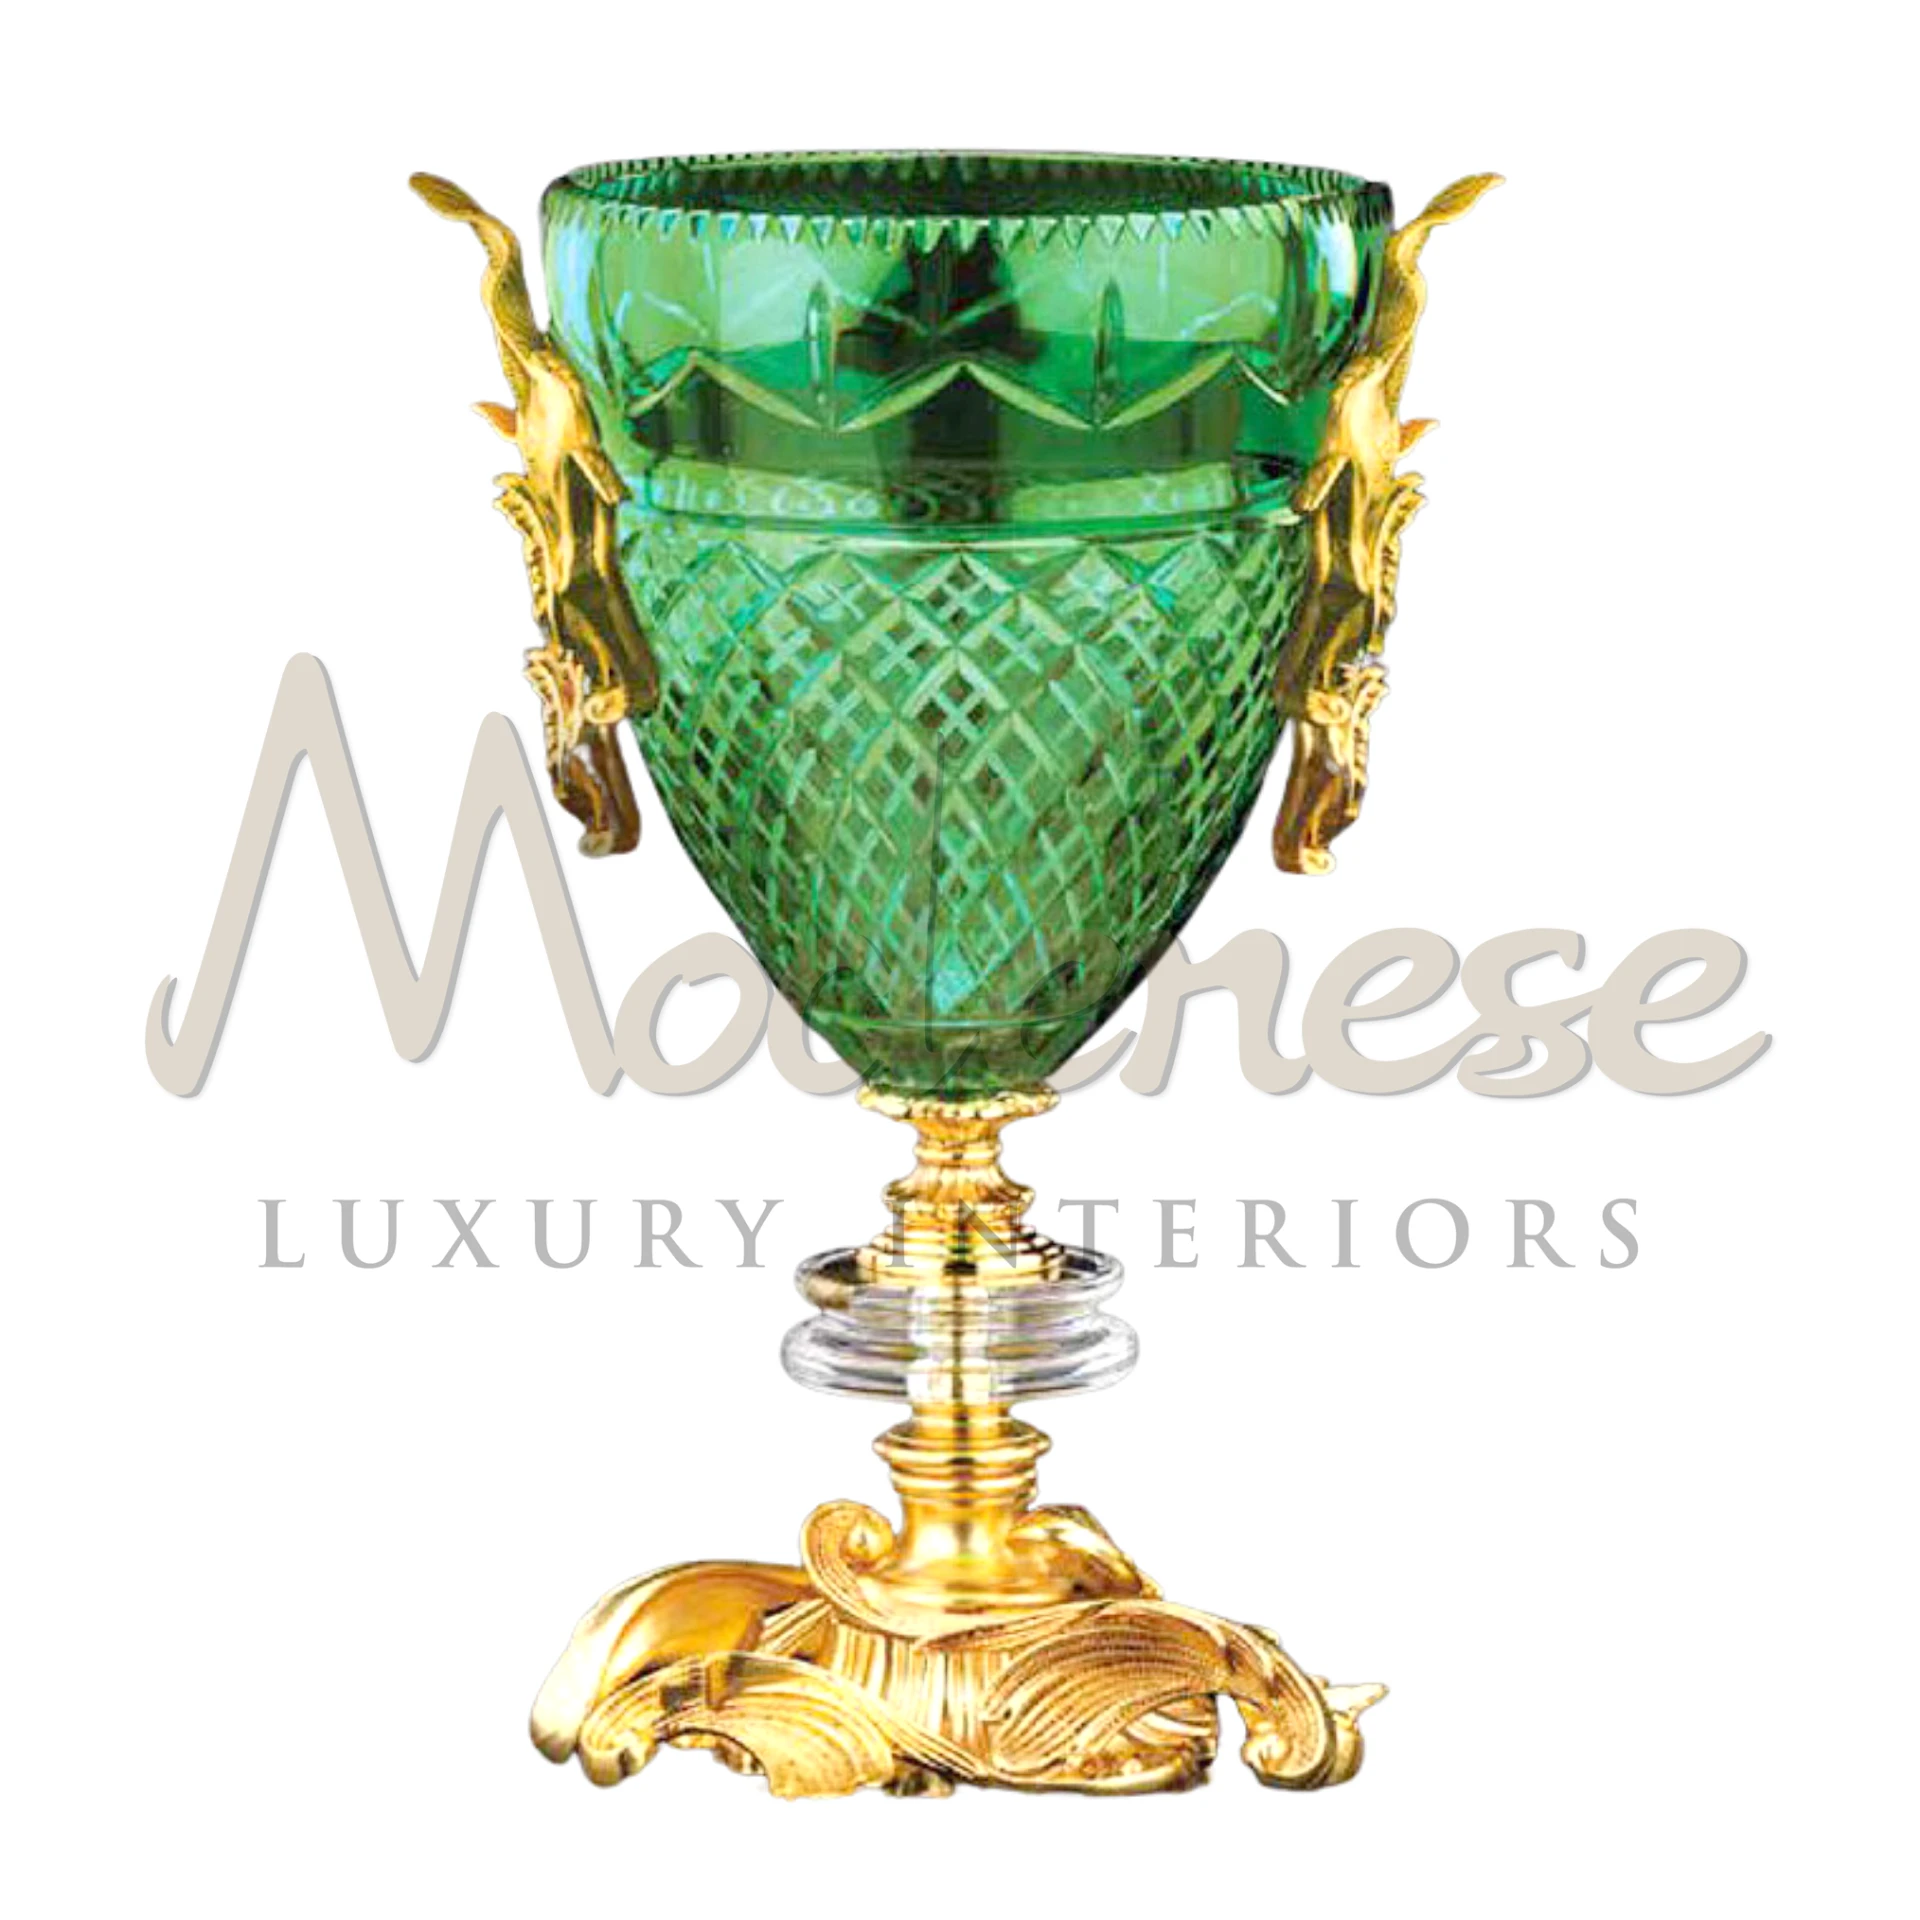 Elegant Imperial Green Glass Vase - Perfect decor accent for luxury interiors.